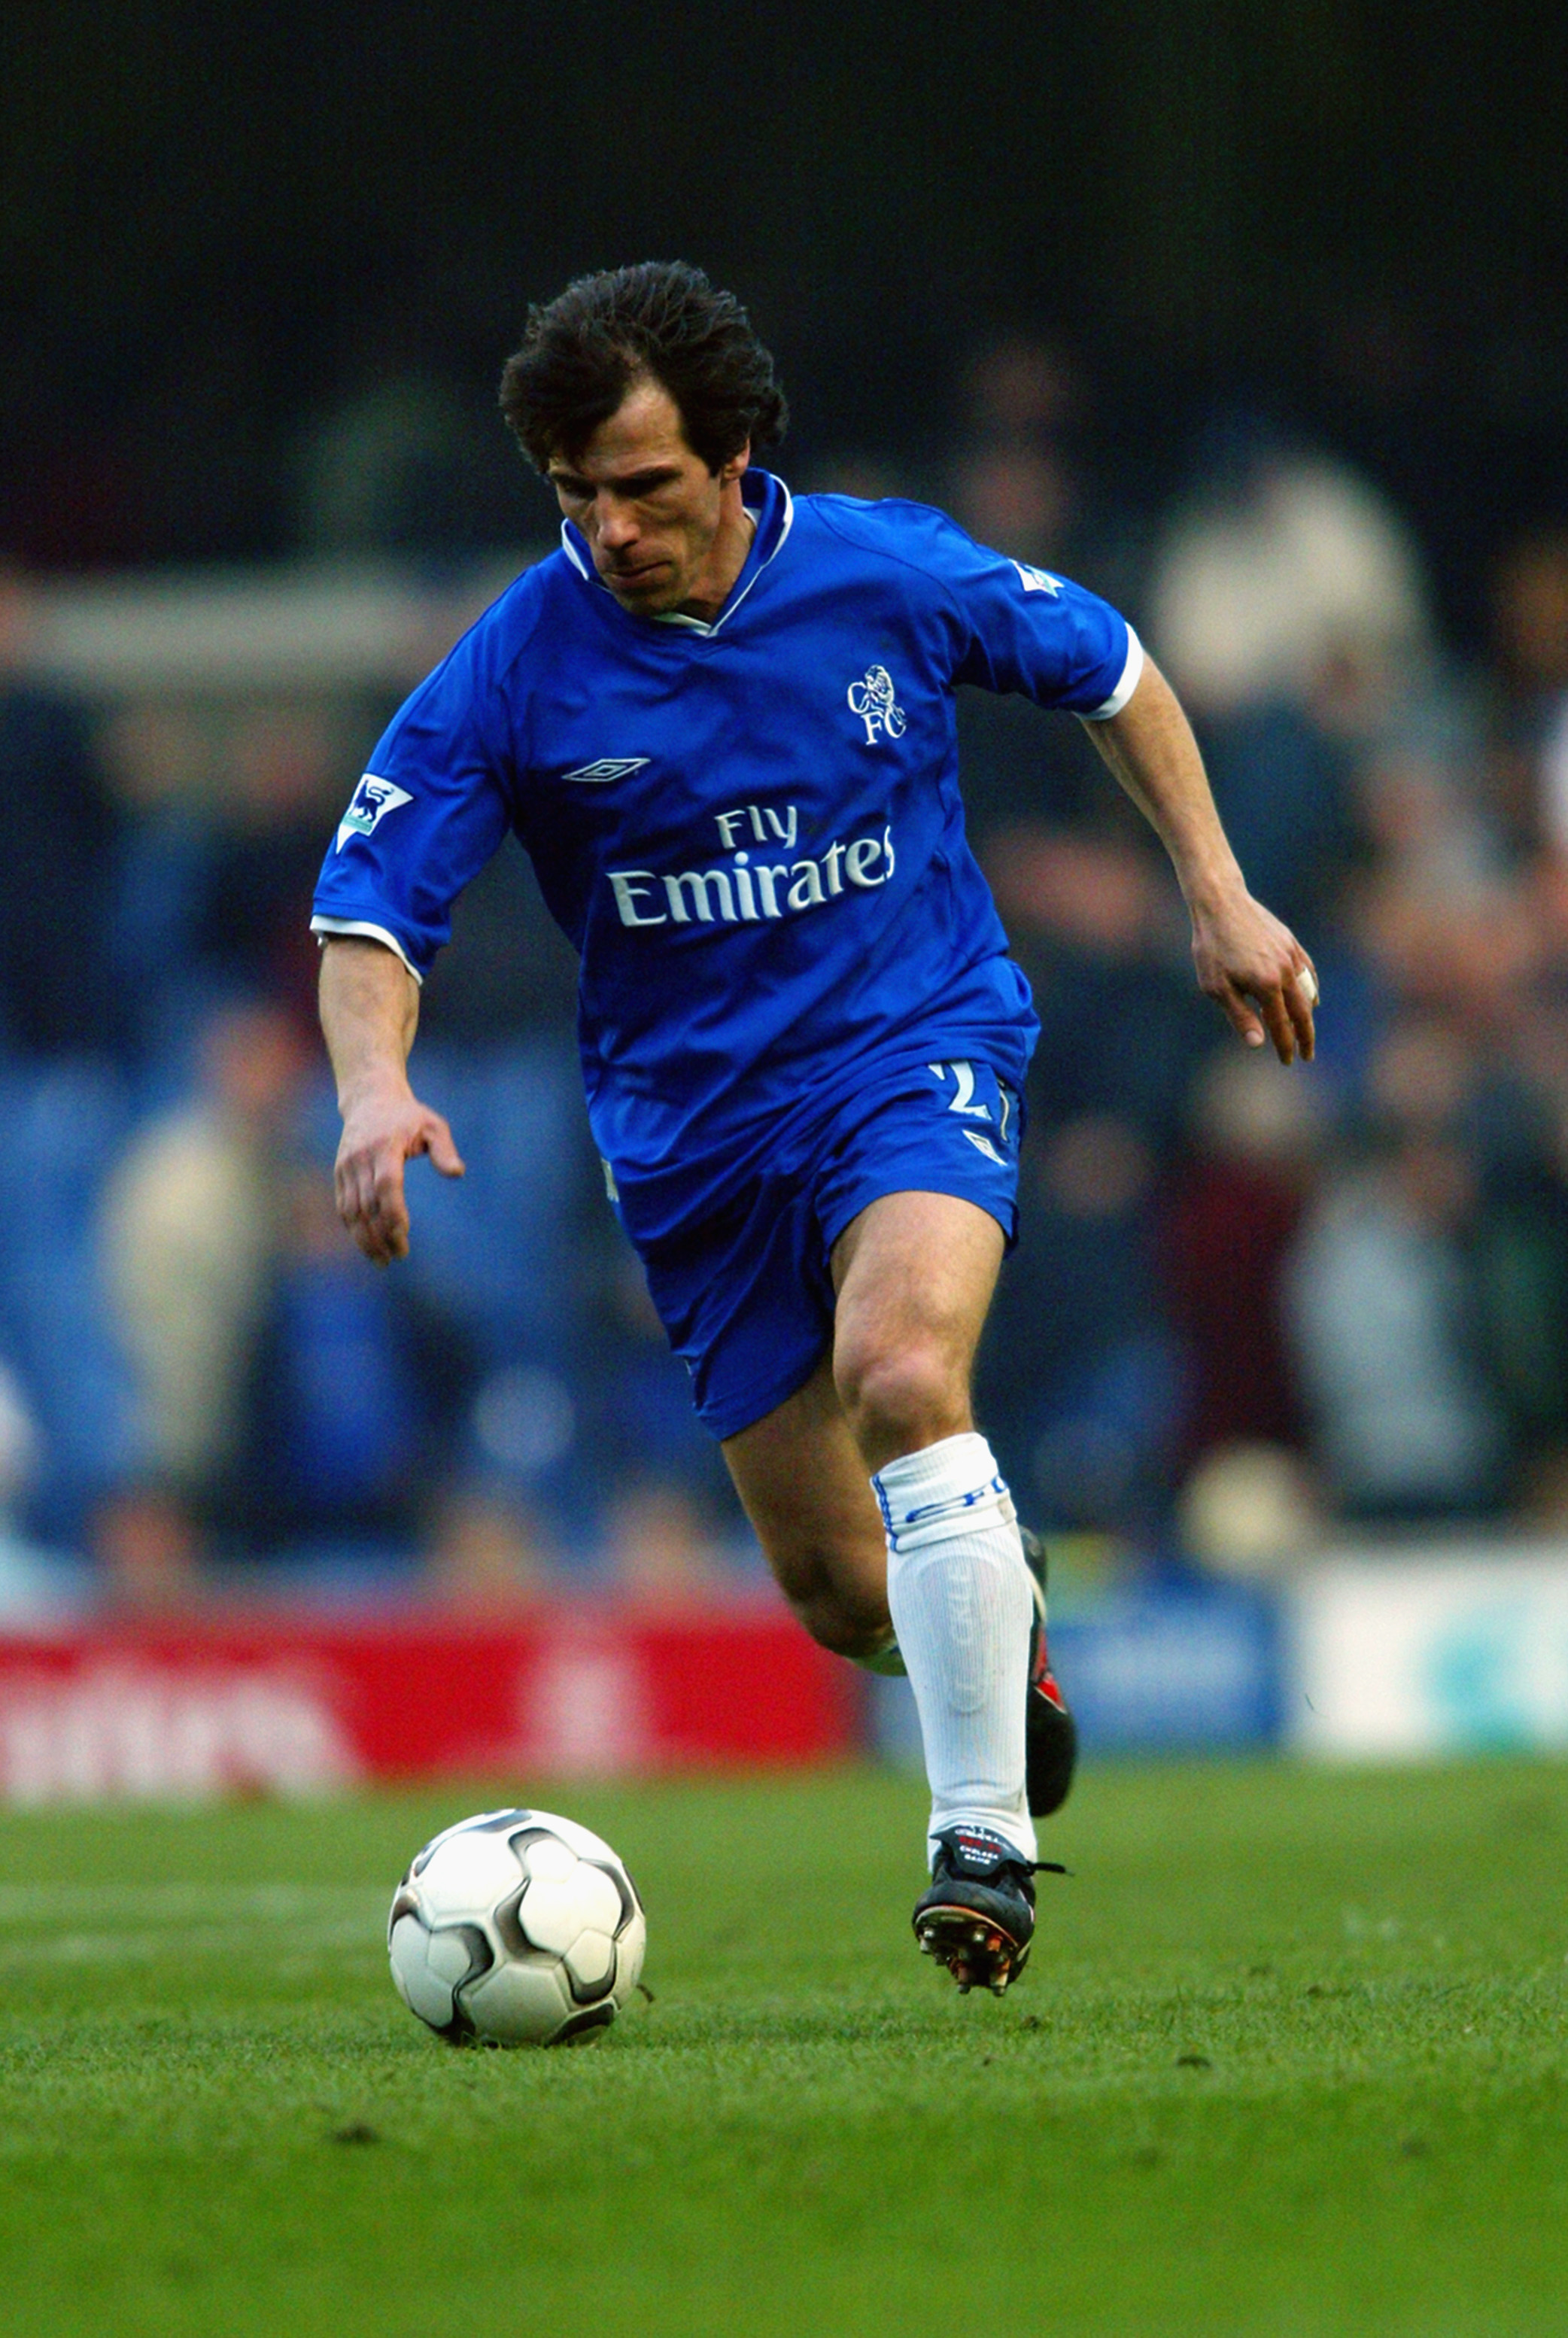 LONDON - FEBRUARY 22:  Gianfranco Zola of Chelsea runs with the ball during the FA Barclaycard Premiership match between Chelsea and Blackburn Rovers held on February 22, 2003 at Stamford Bridge, in London. Blackburn Rovers won the match 2-1. (Photo by Be